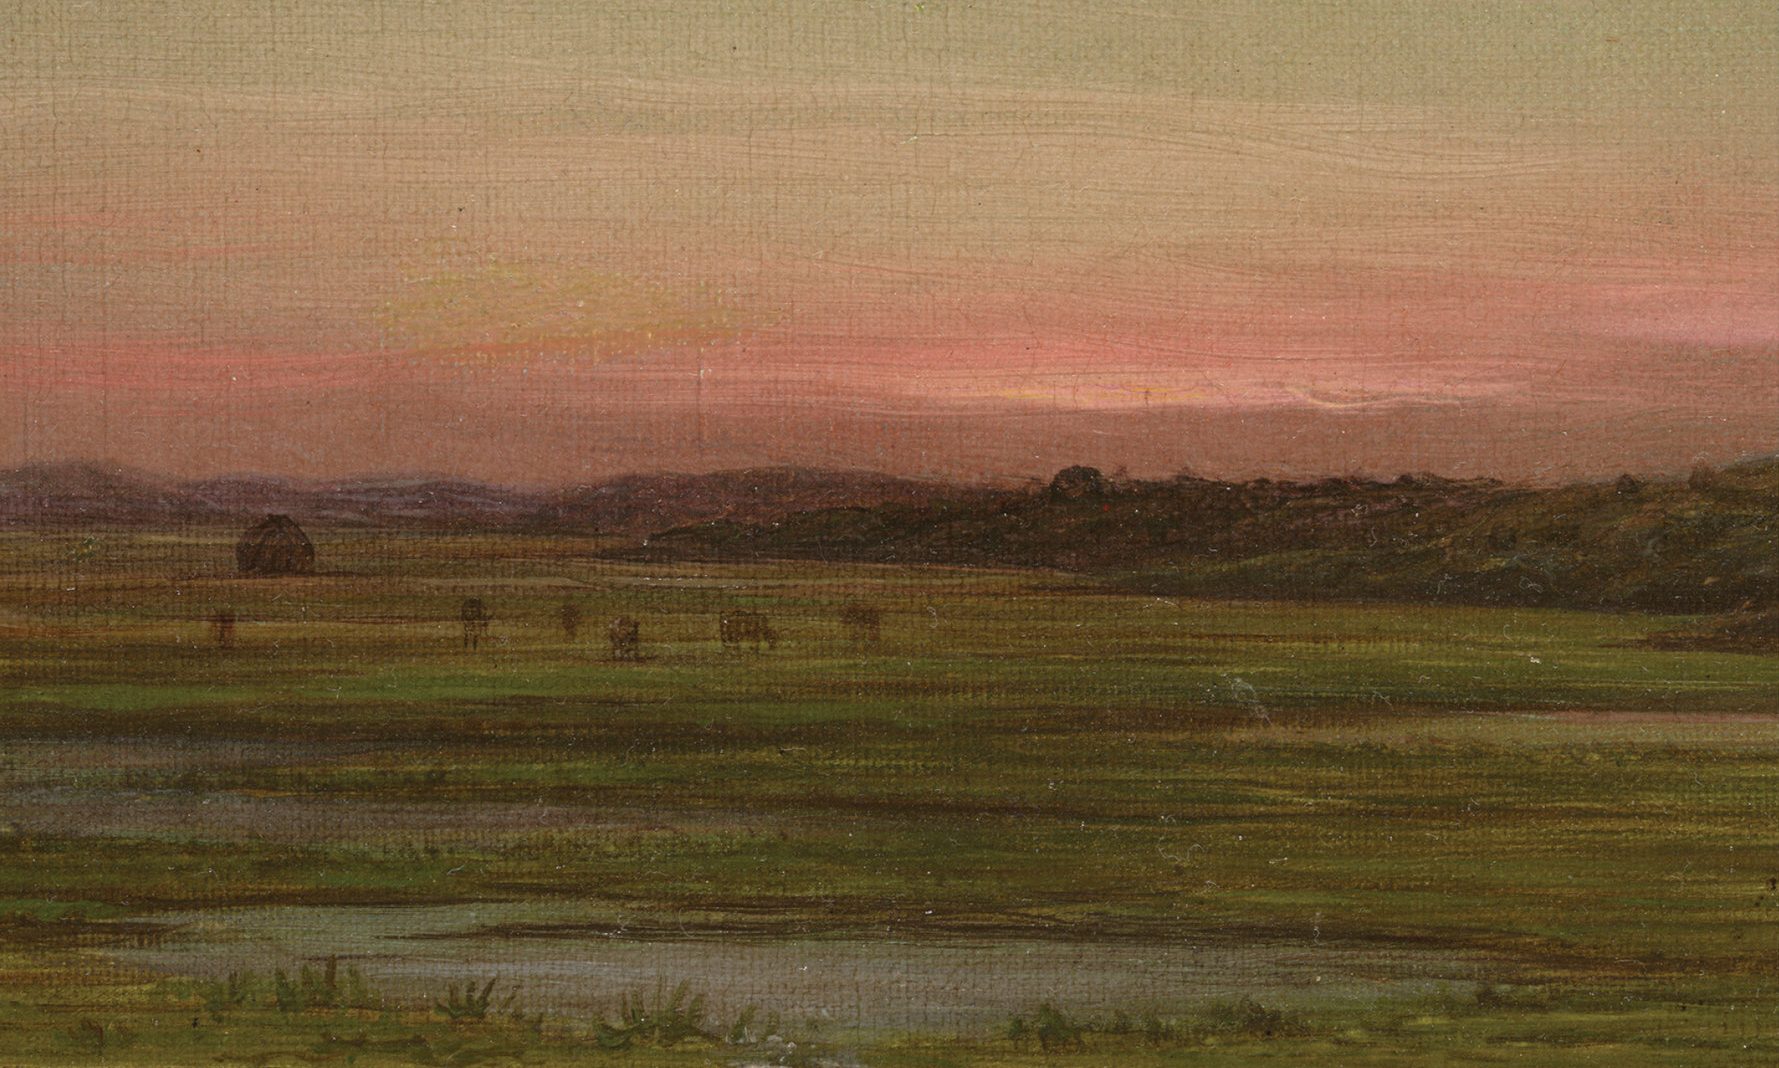 Book cover for "The end of landscape" featuring a landscape painting of a field and trees